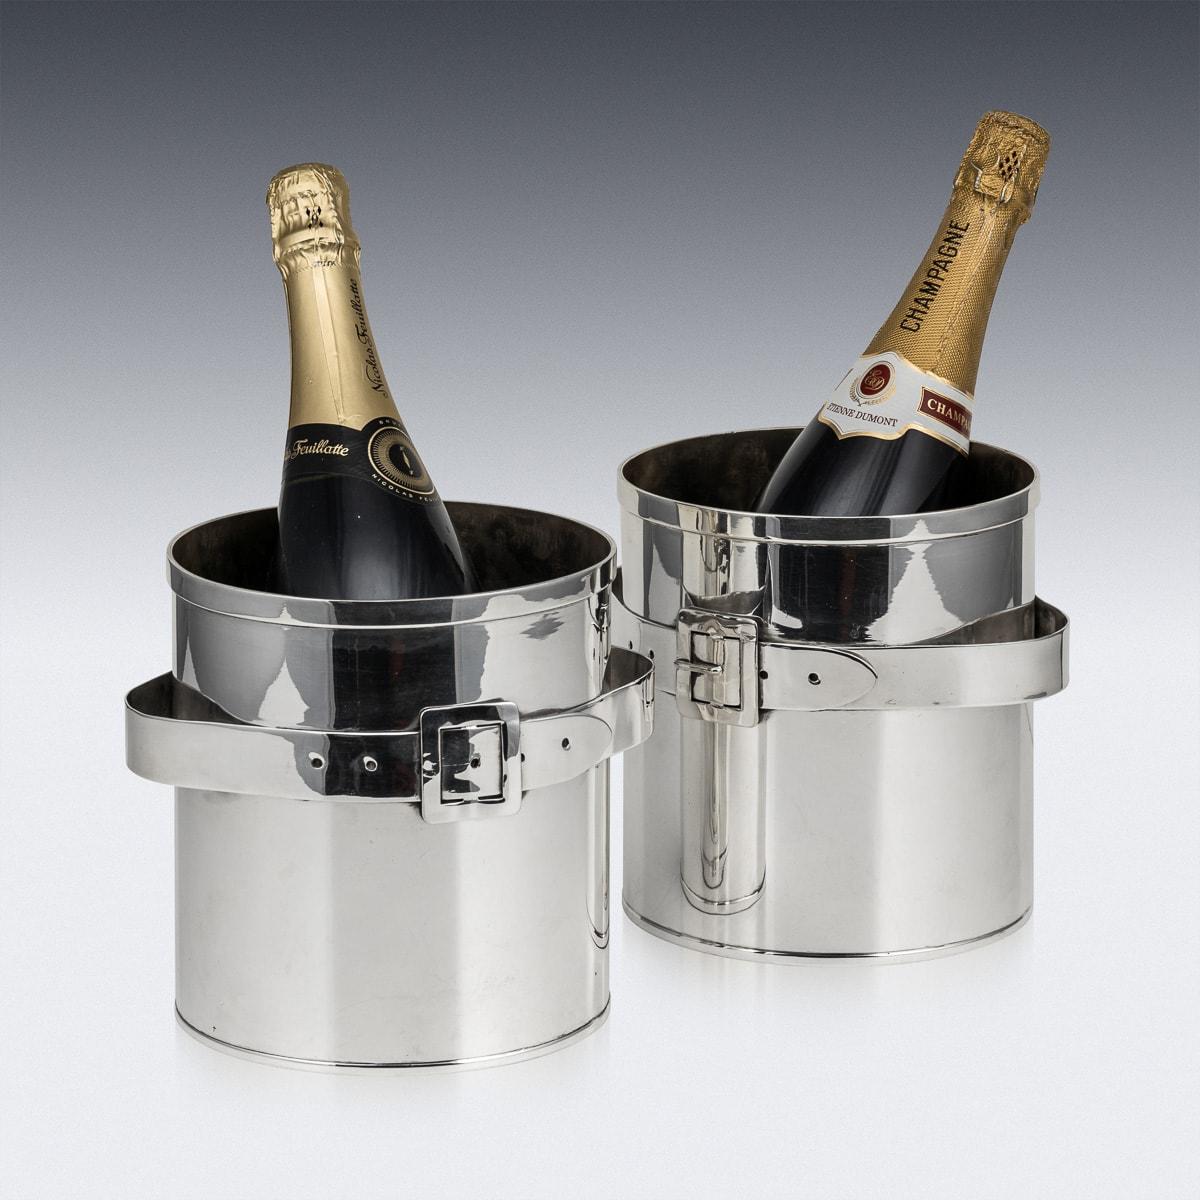 A superb pair of mid-20th Century silver plated ice buckets. The buckets are adorned with a brass belt buckle detail and offers ample space to accommodate a bottle of champagne. They serves as an ideal enhancement for any home, whether contemporary